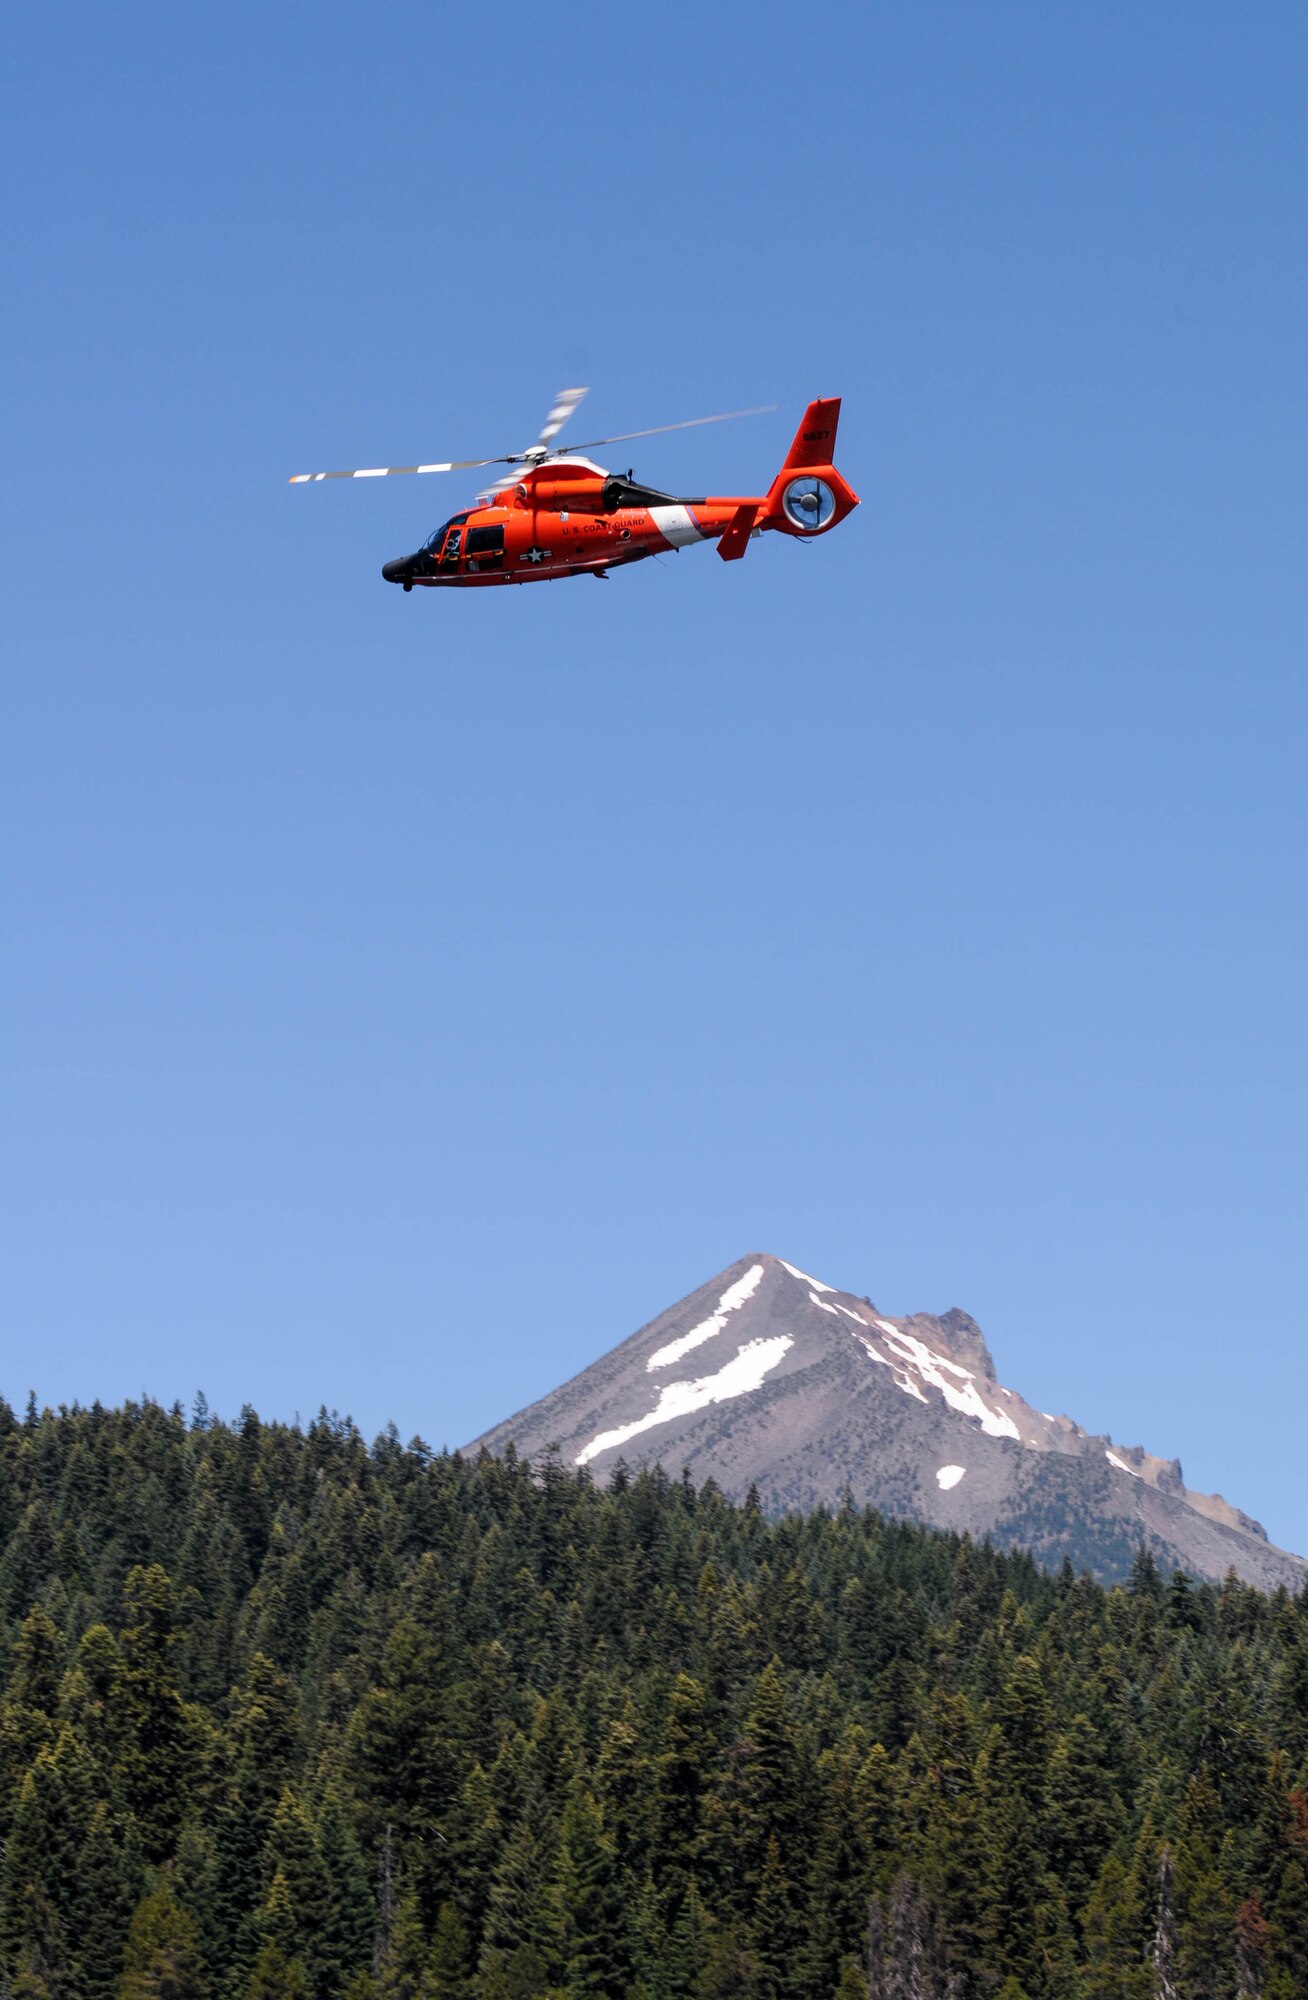 Members from Coast Guard Sector North Bend depart for refueling after completing water survival training at Lake of the Woods near Klamath Falls, Ore., July 22, 2016. Aircrew Flight Equipment members joined with Klamath County Sheriff's Department agencies and members of the Coast Guard Sector North Bend to provide Kingsley’s F-15 pilots water survival training in the event of an emergency ejection. (U.S. Air National Guard photo by Staff Sgt. Penny Snoozy)